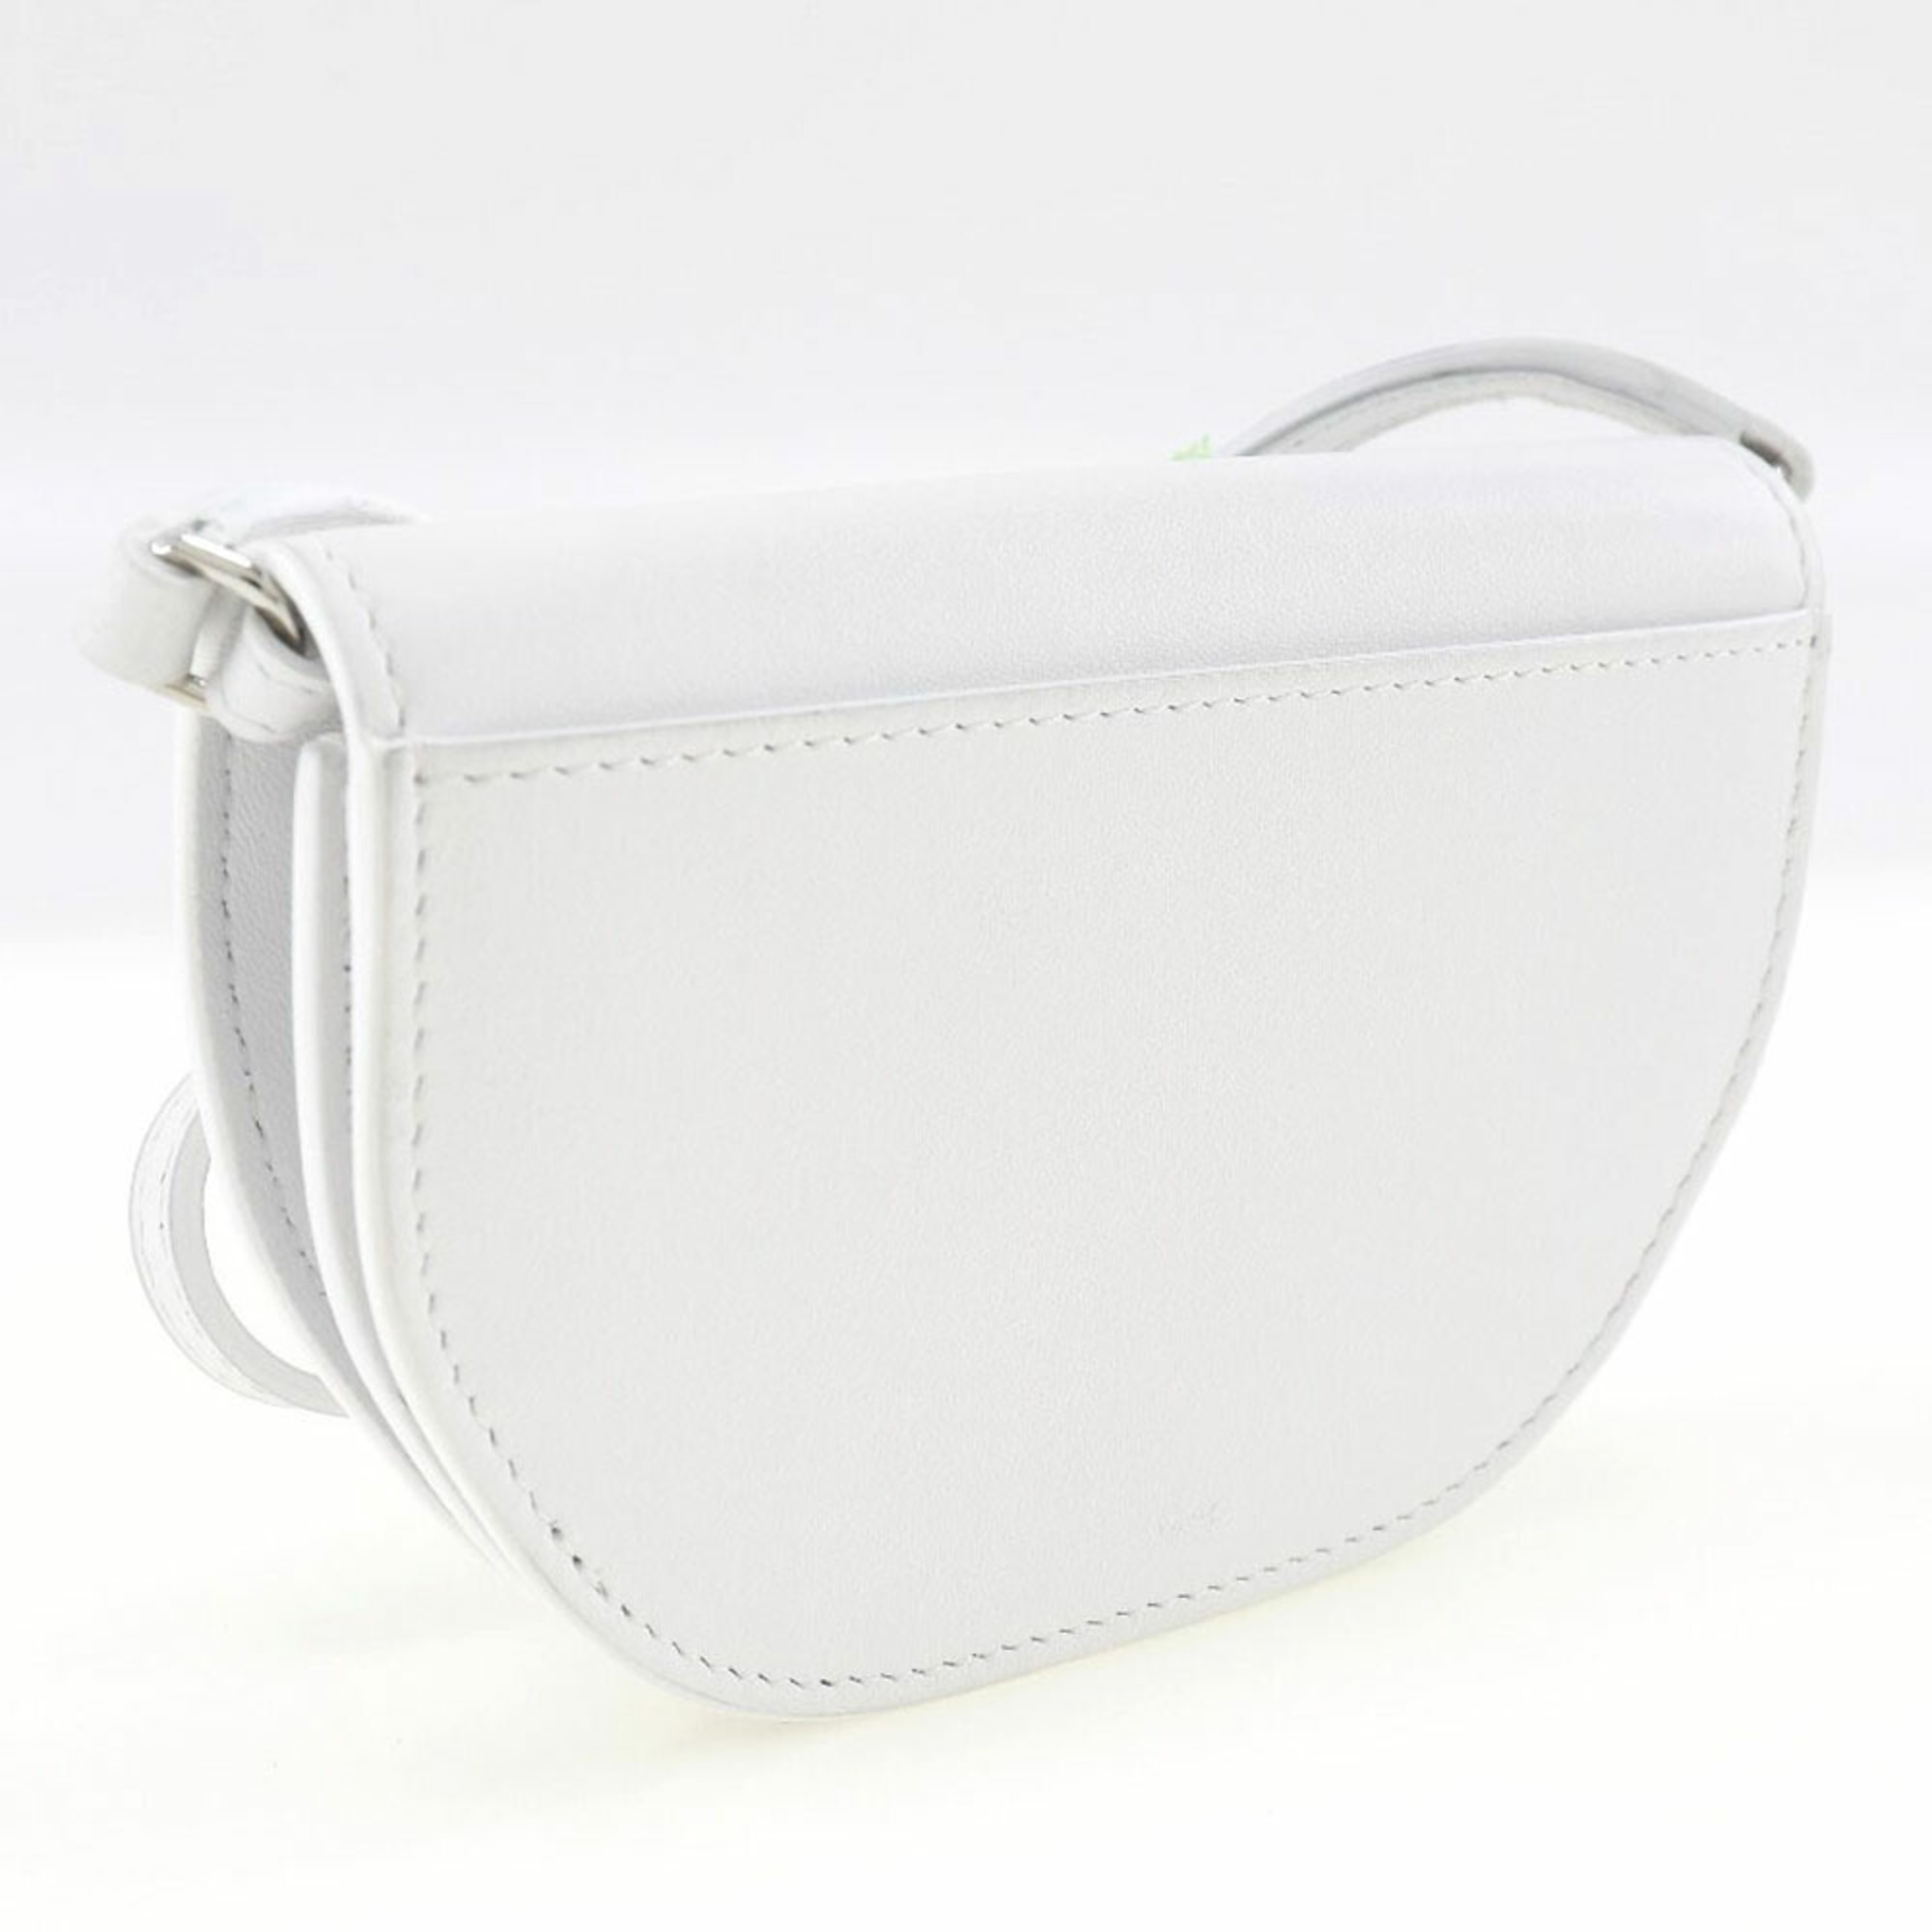 BURBERRY Burberry Olympia Mini Shoulder Bag Leather White Women's